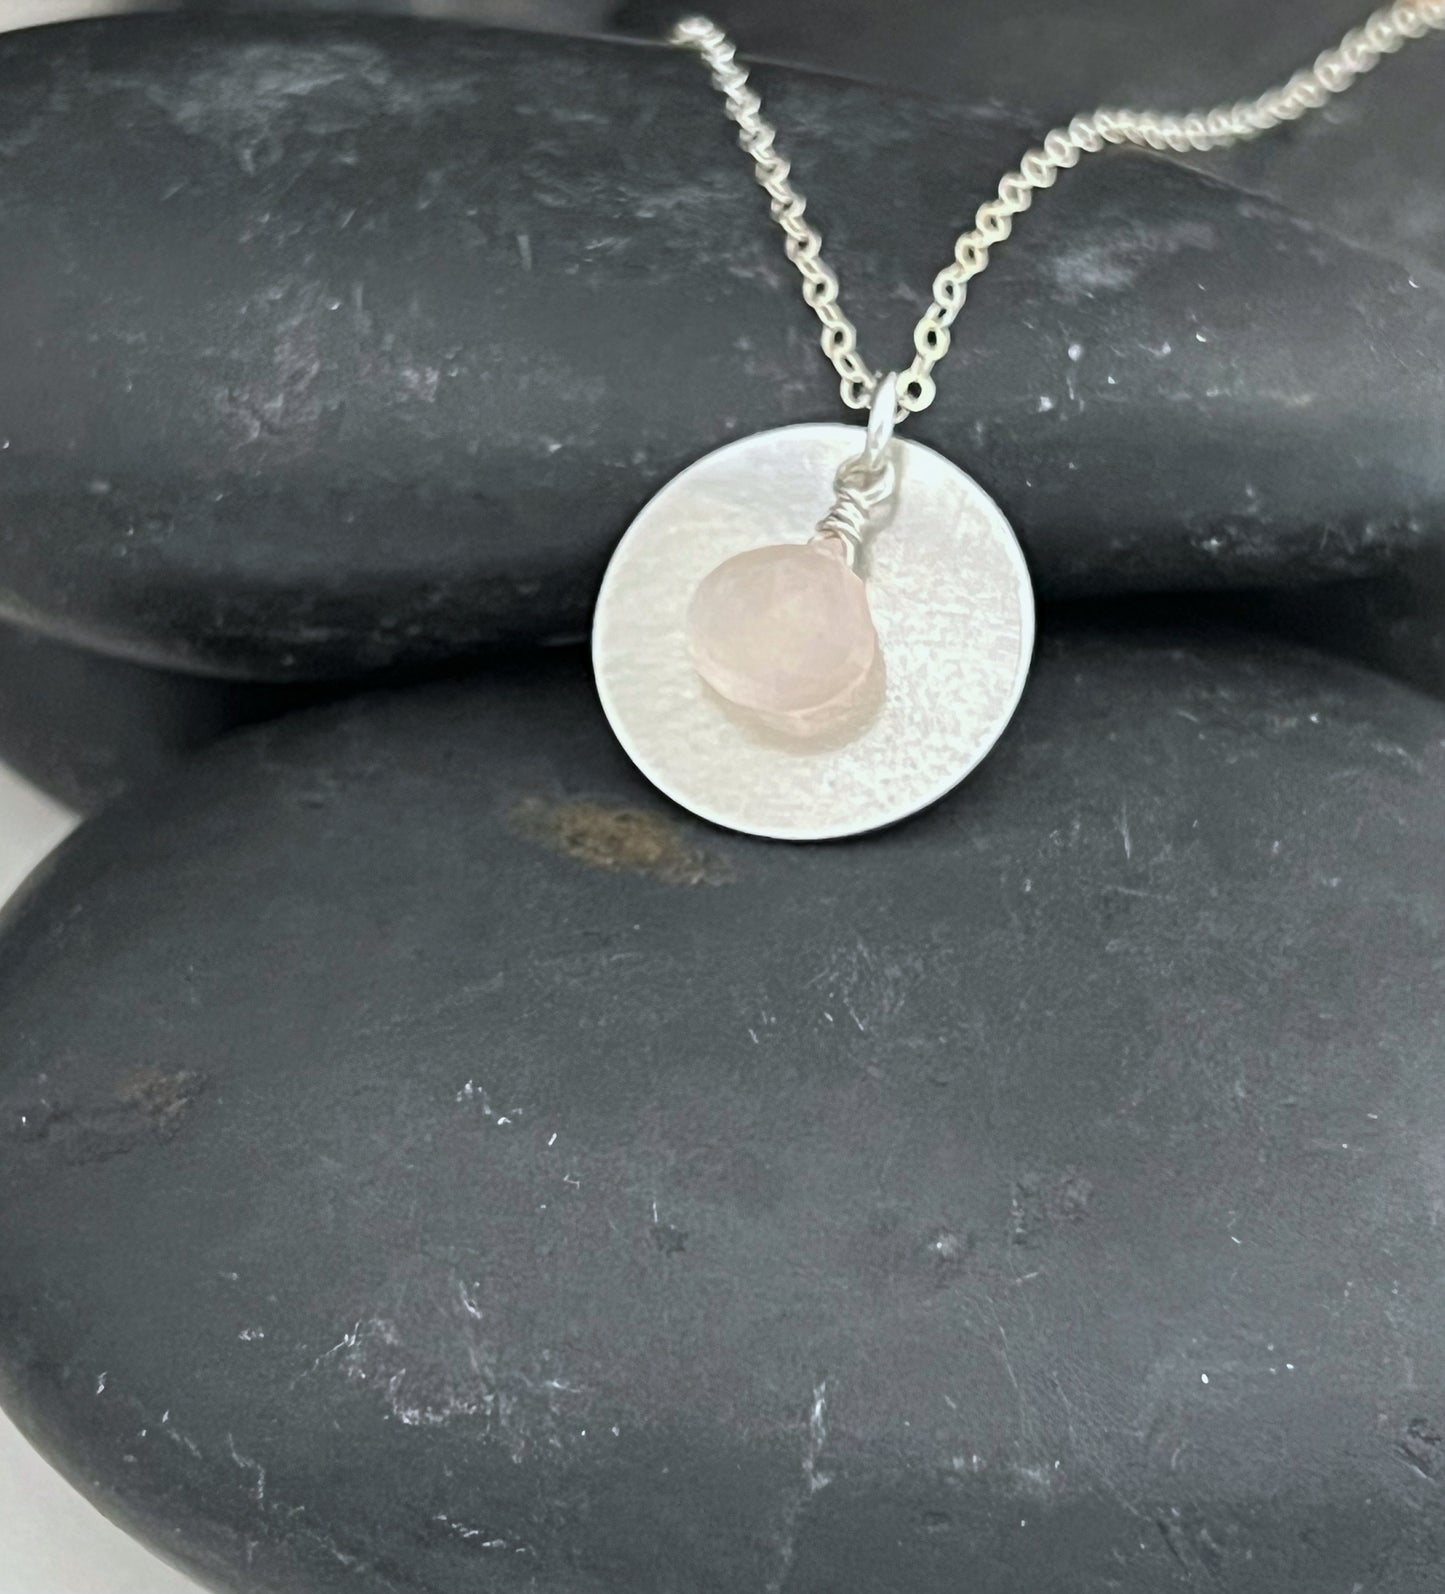 Forged sterling silver moon necklace with rose quartz